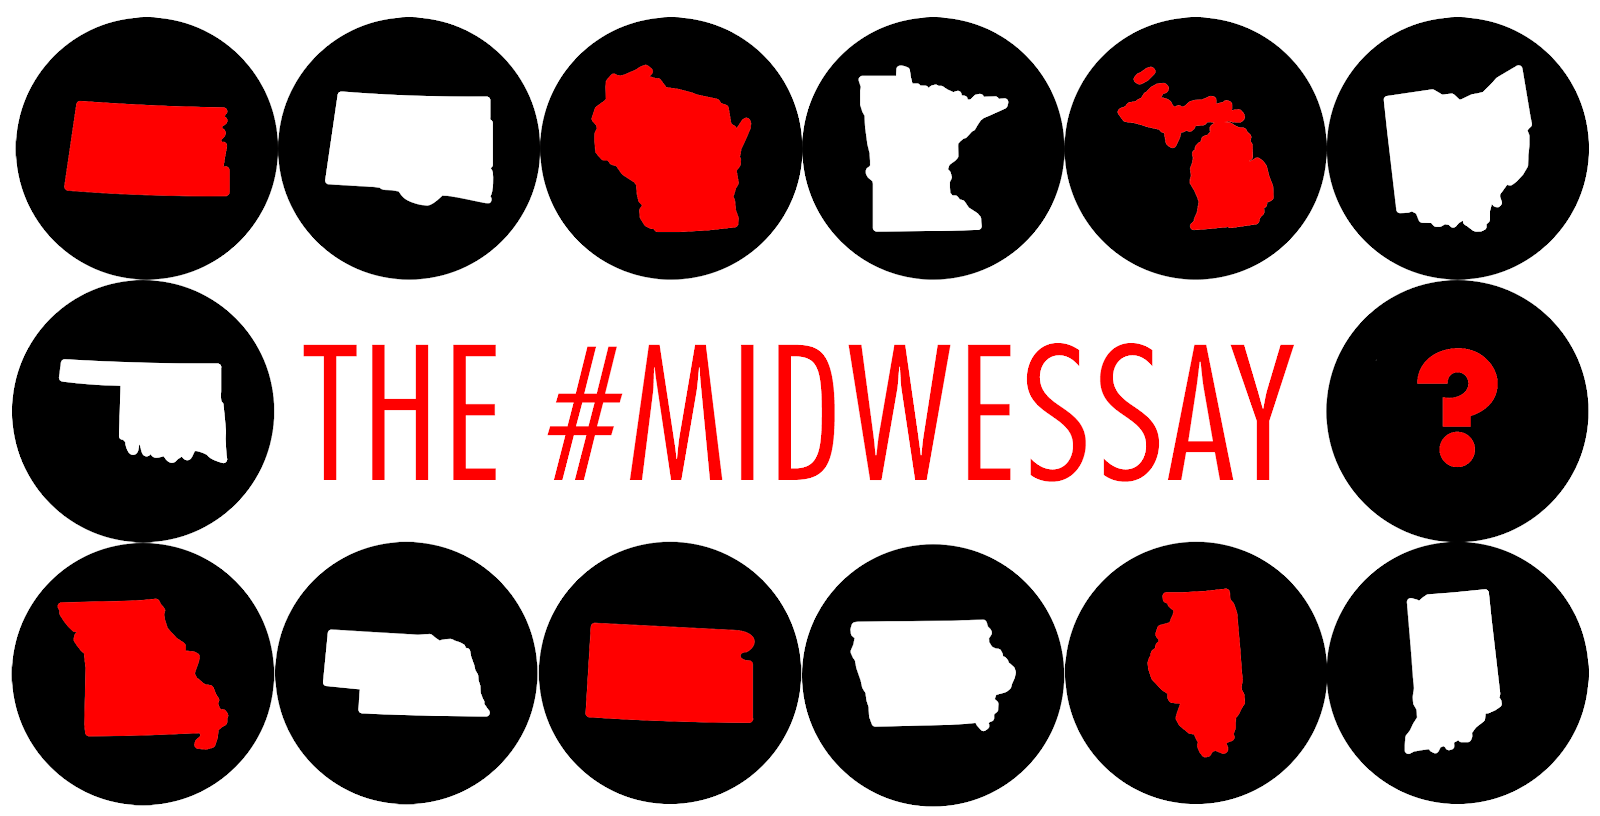 The #Midwessay